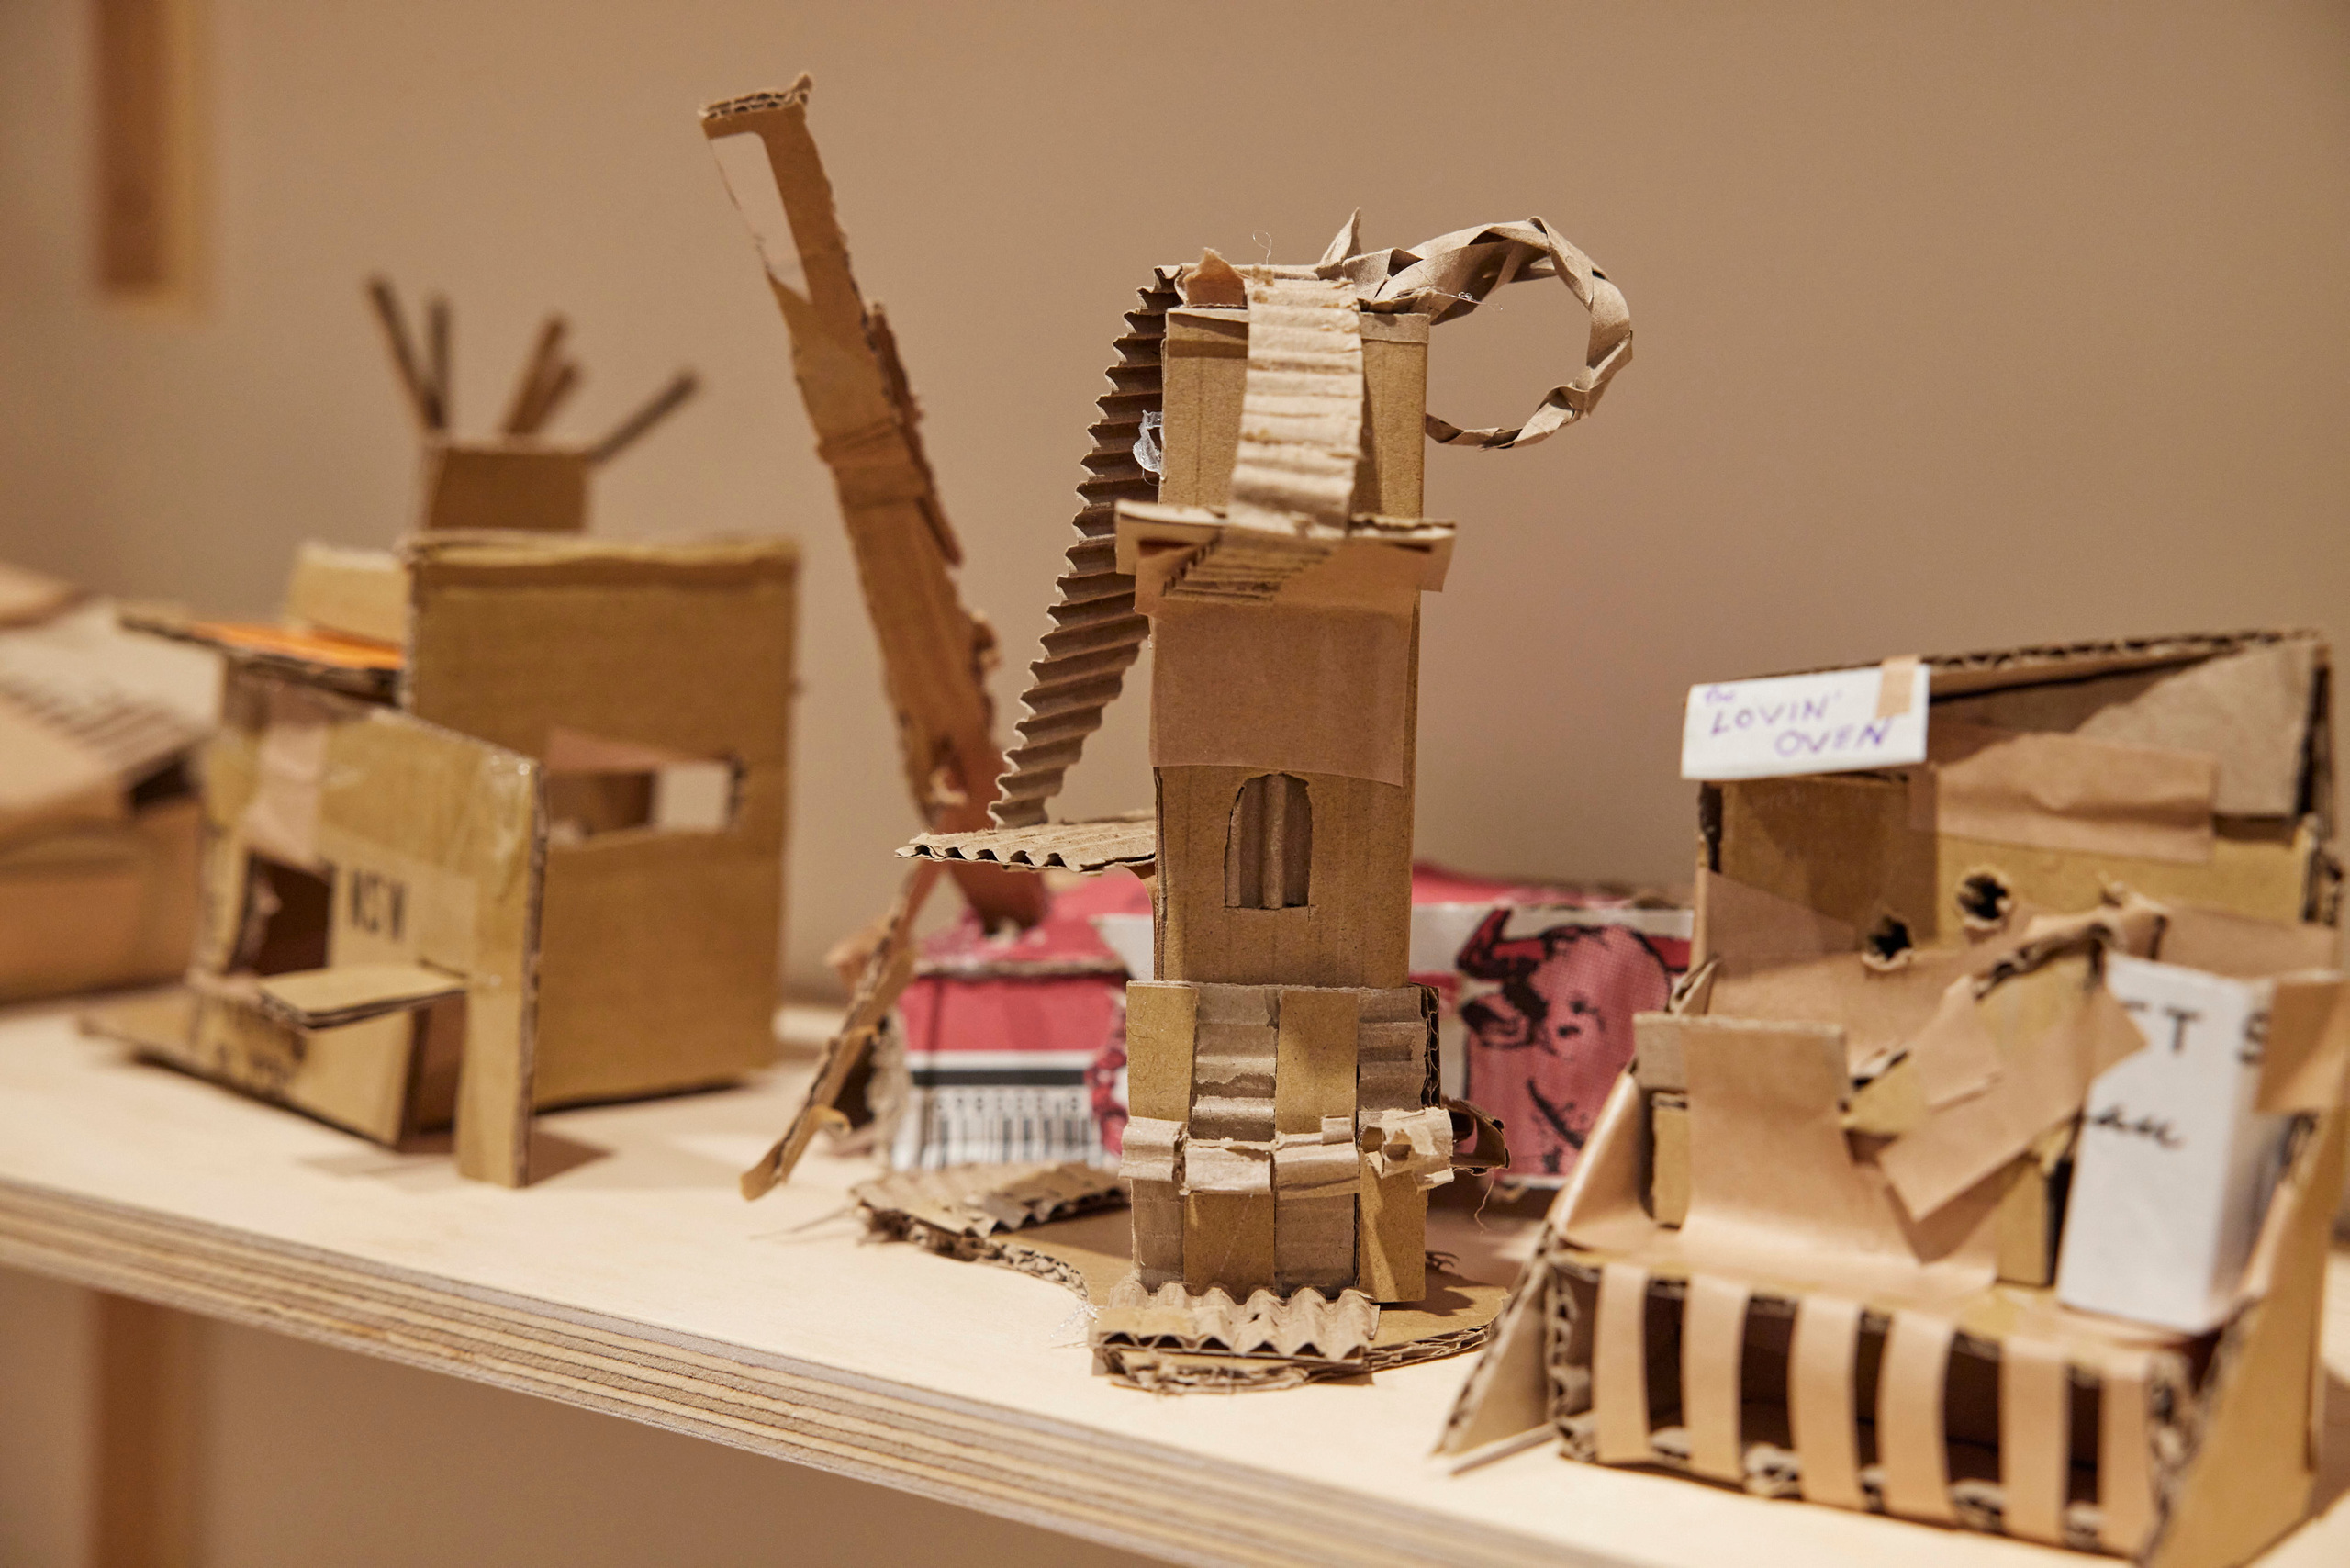 Small cardboard structures on a shelf